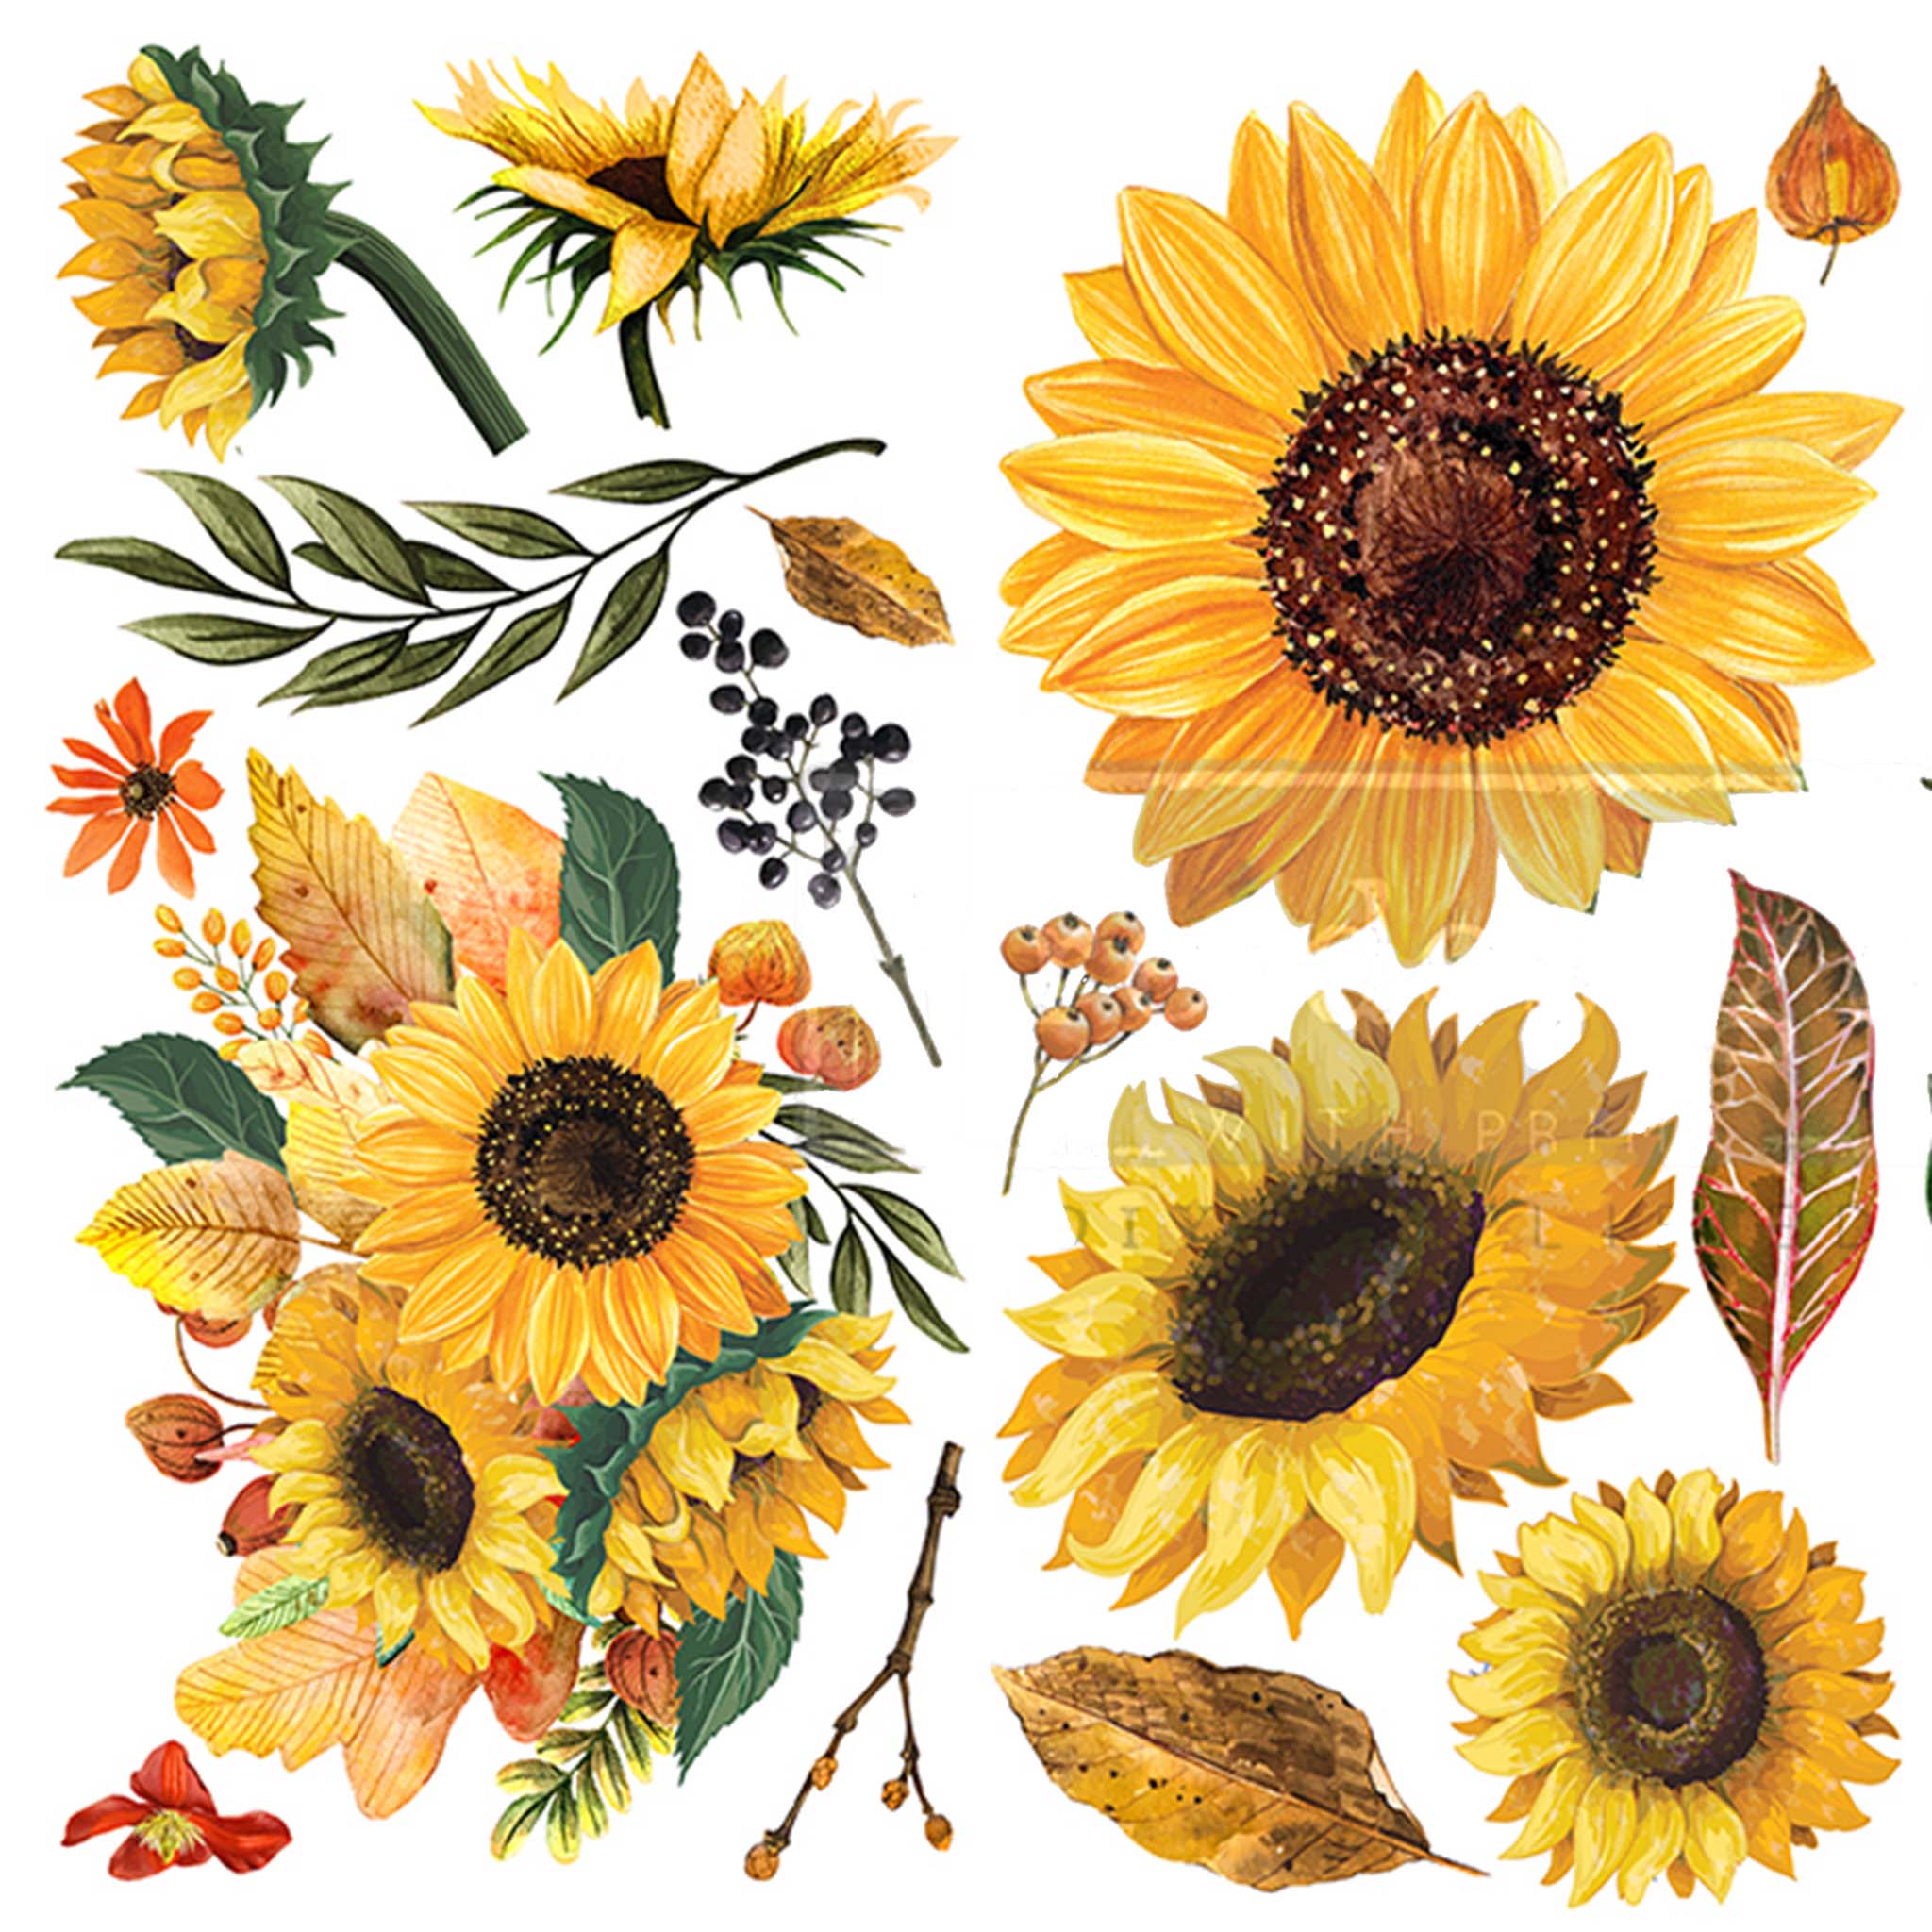 Small rub-on transfers of sunflowers, berries, leaves, and a sunflower bouquet.